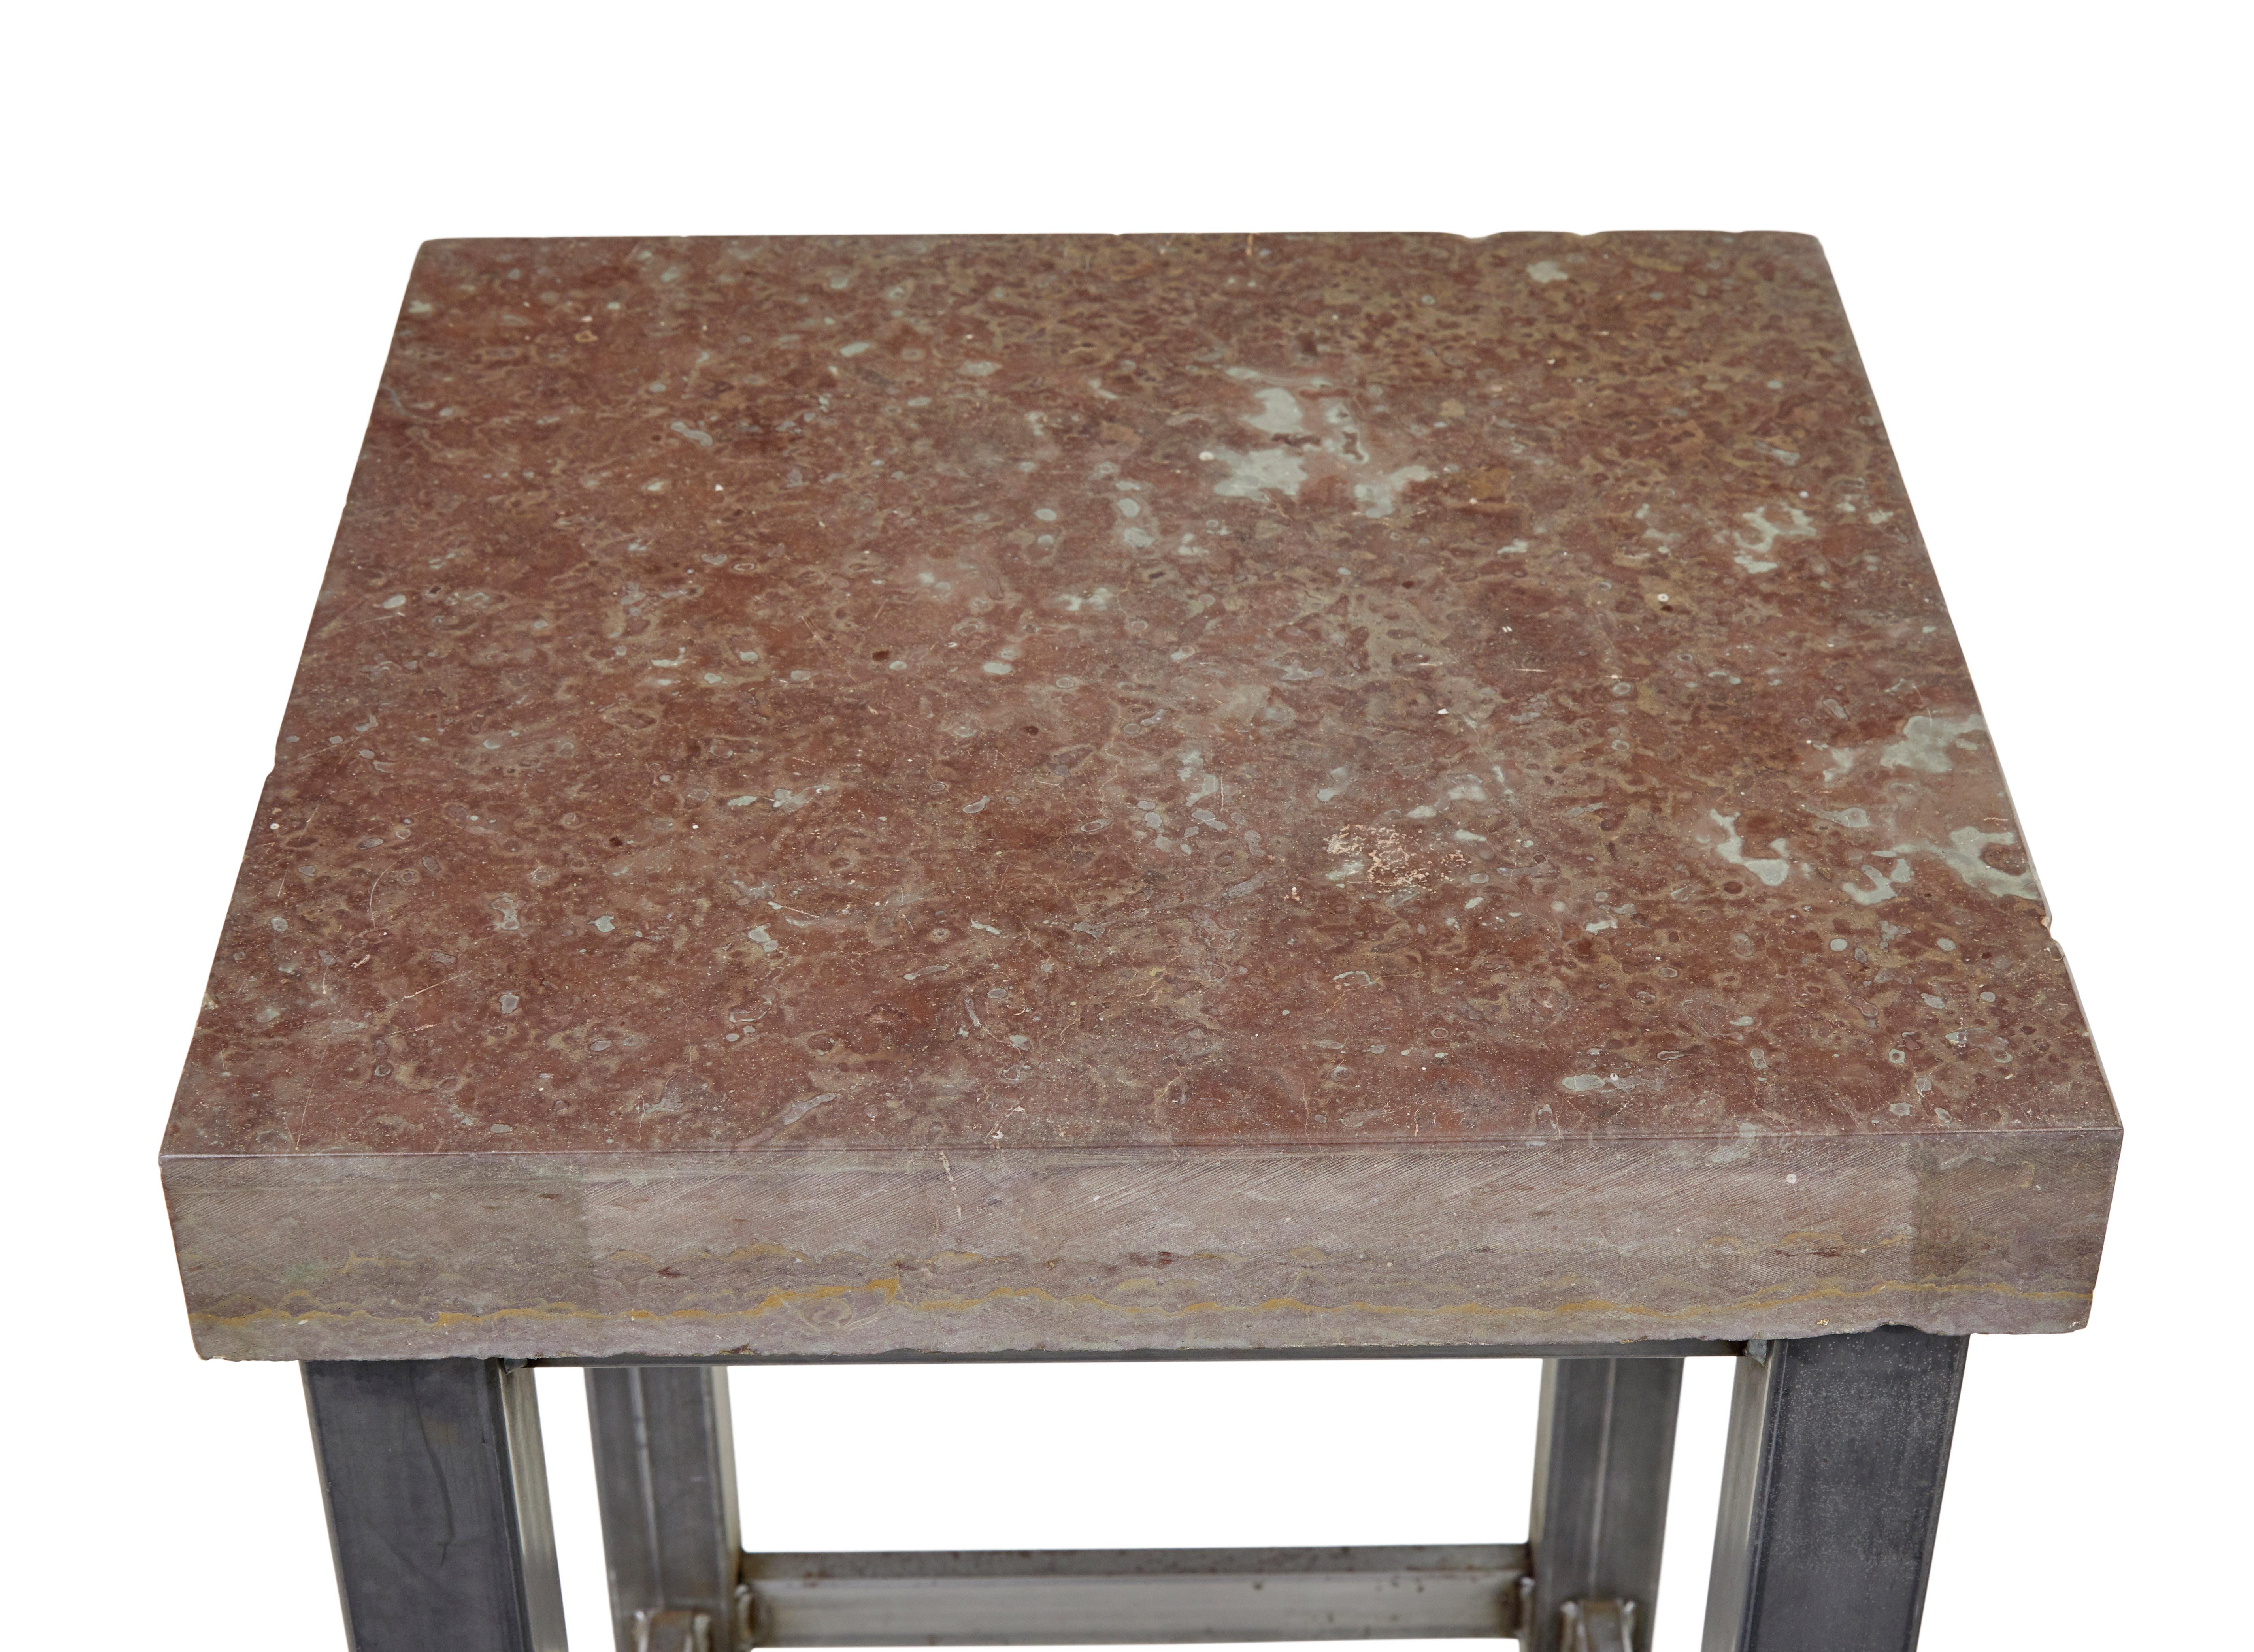 20th Century tubular steel lamp table with marble top In Good Condition For Sale In Debenham, Suffolk